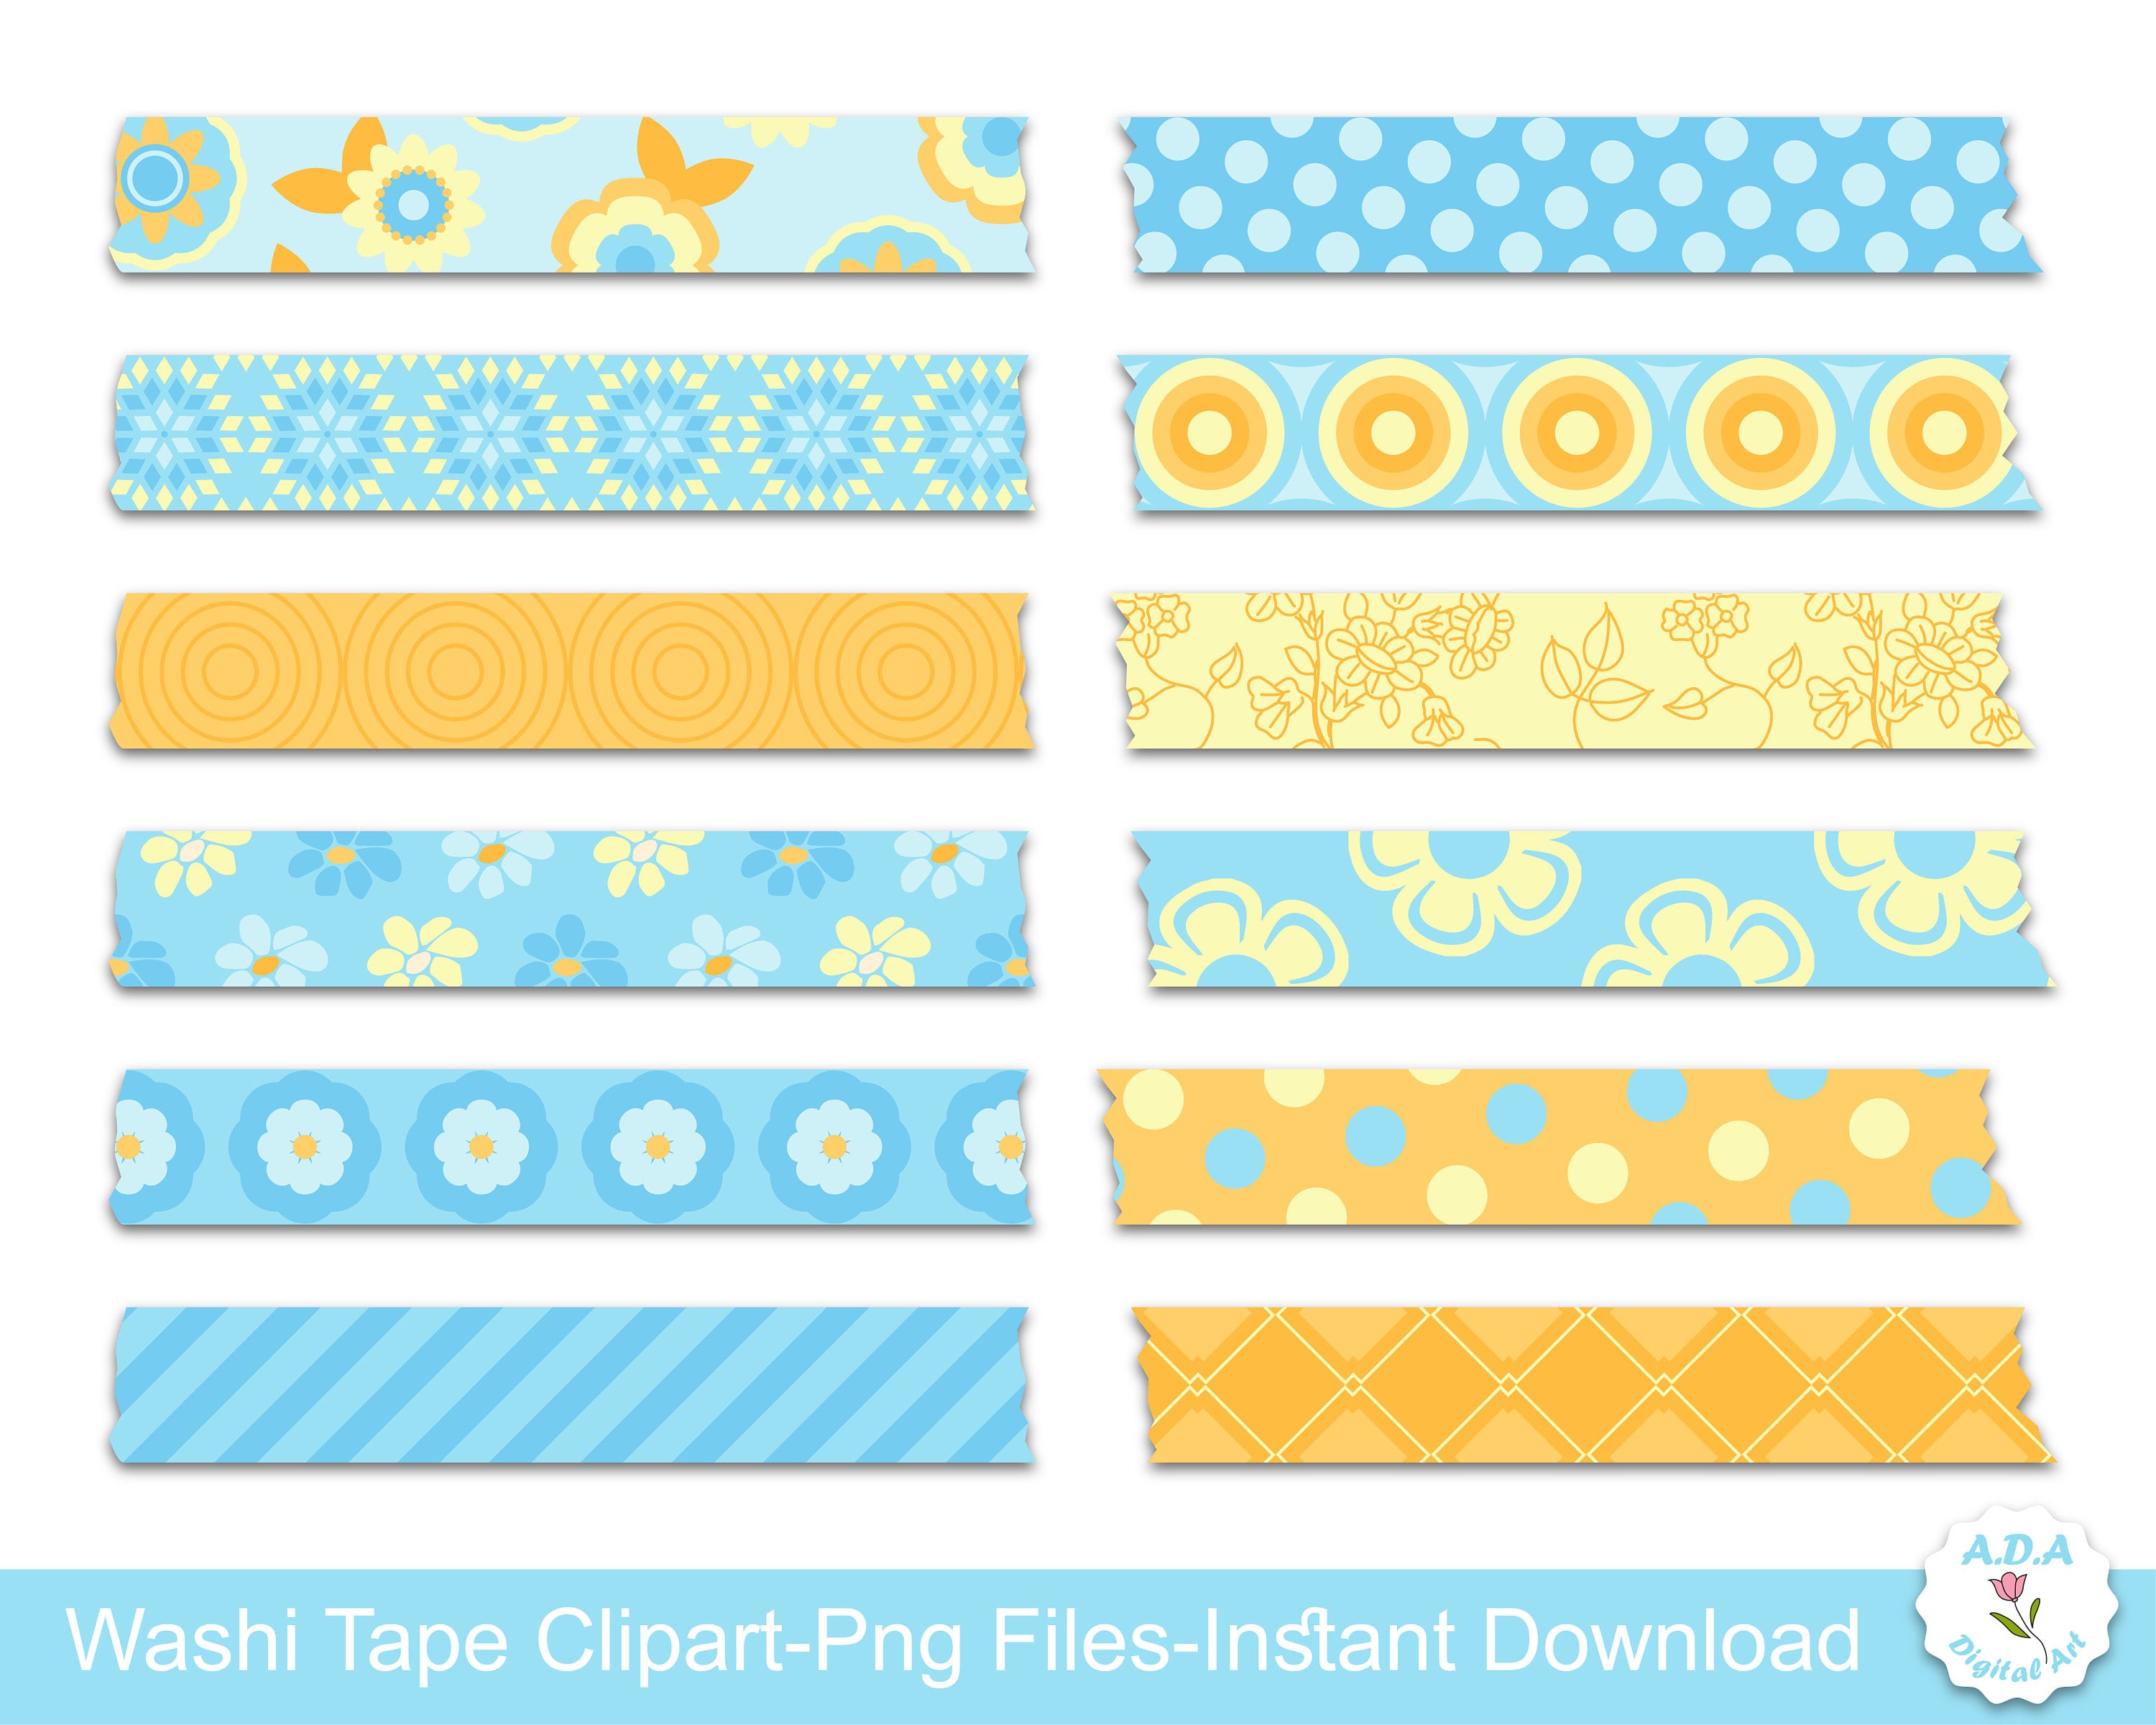 Cute Washi Tape Vector PNG Images, Washi Tape With Blue Color, Washi Tape,  Tape, Journal Sticker PNG Image For Free Download